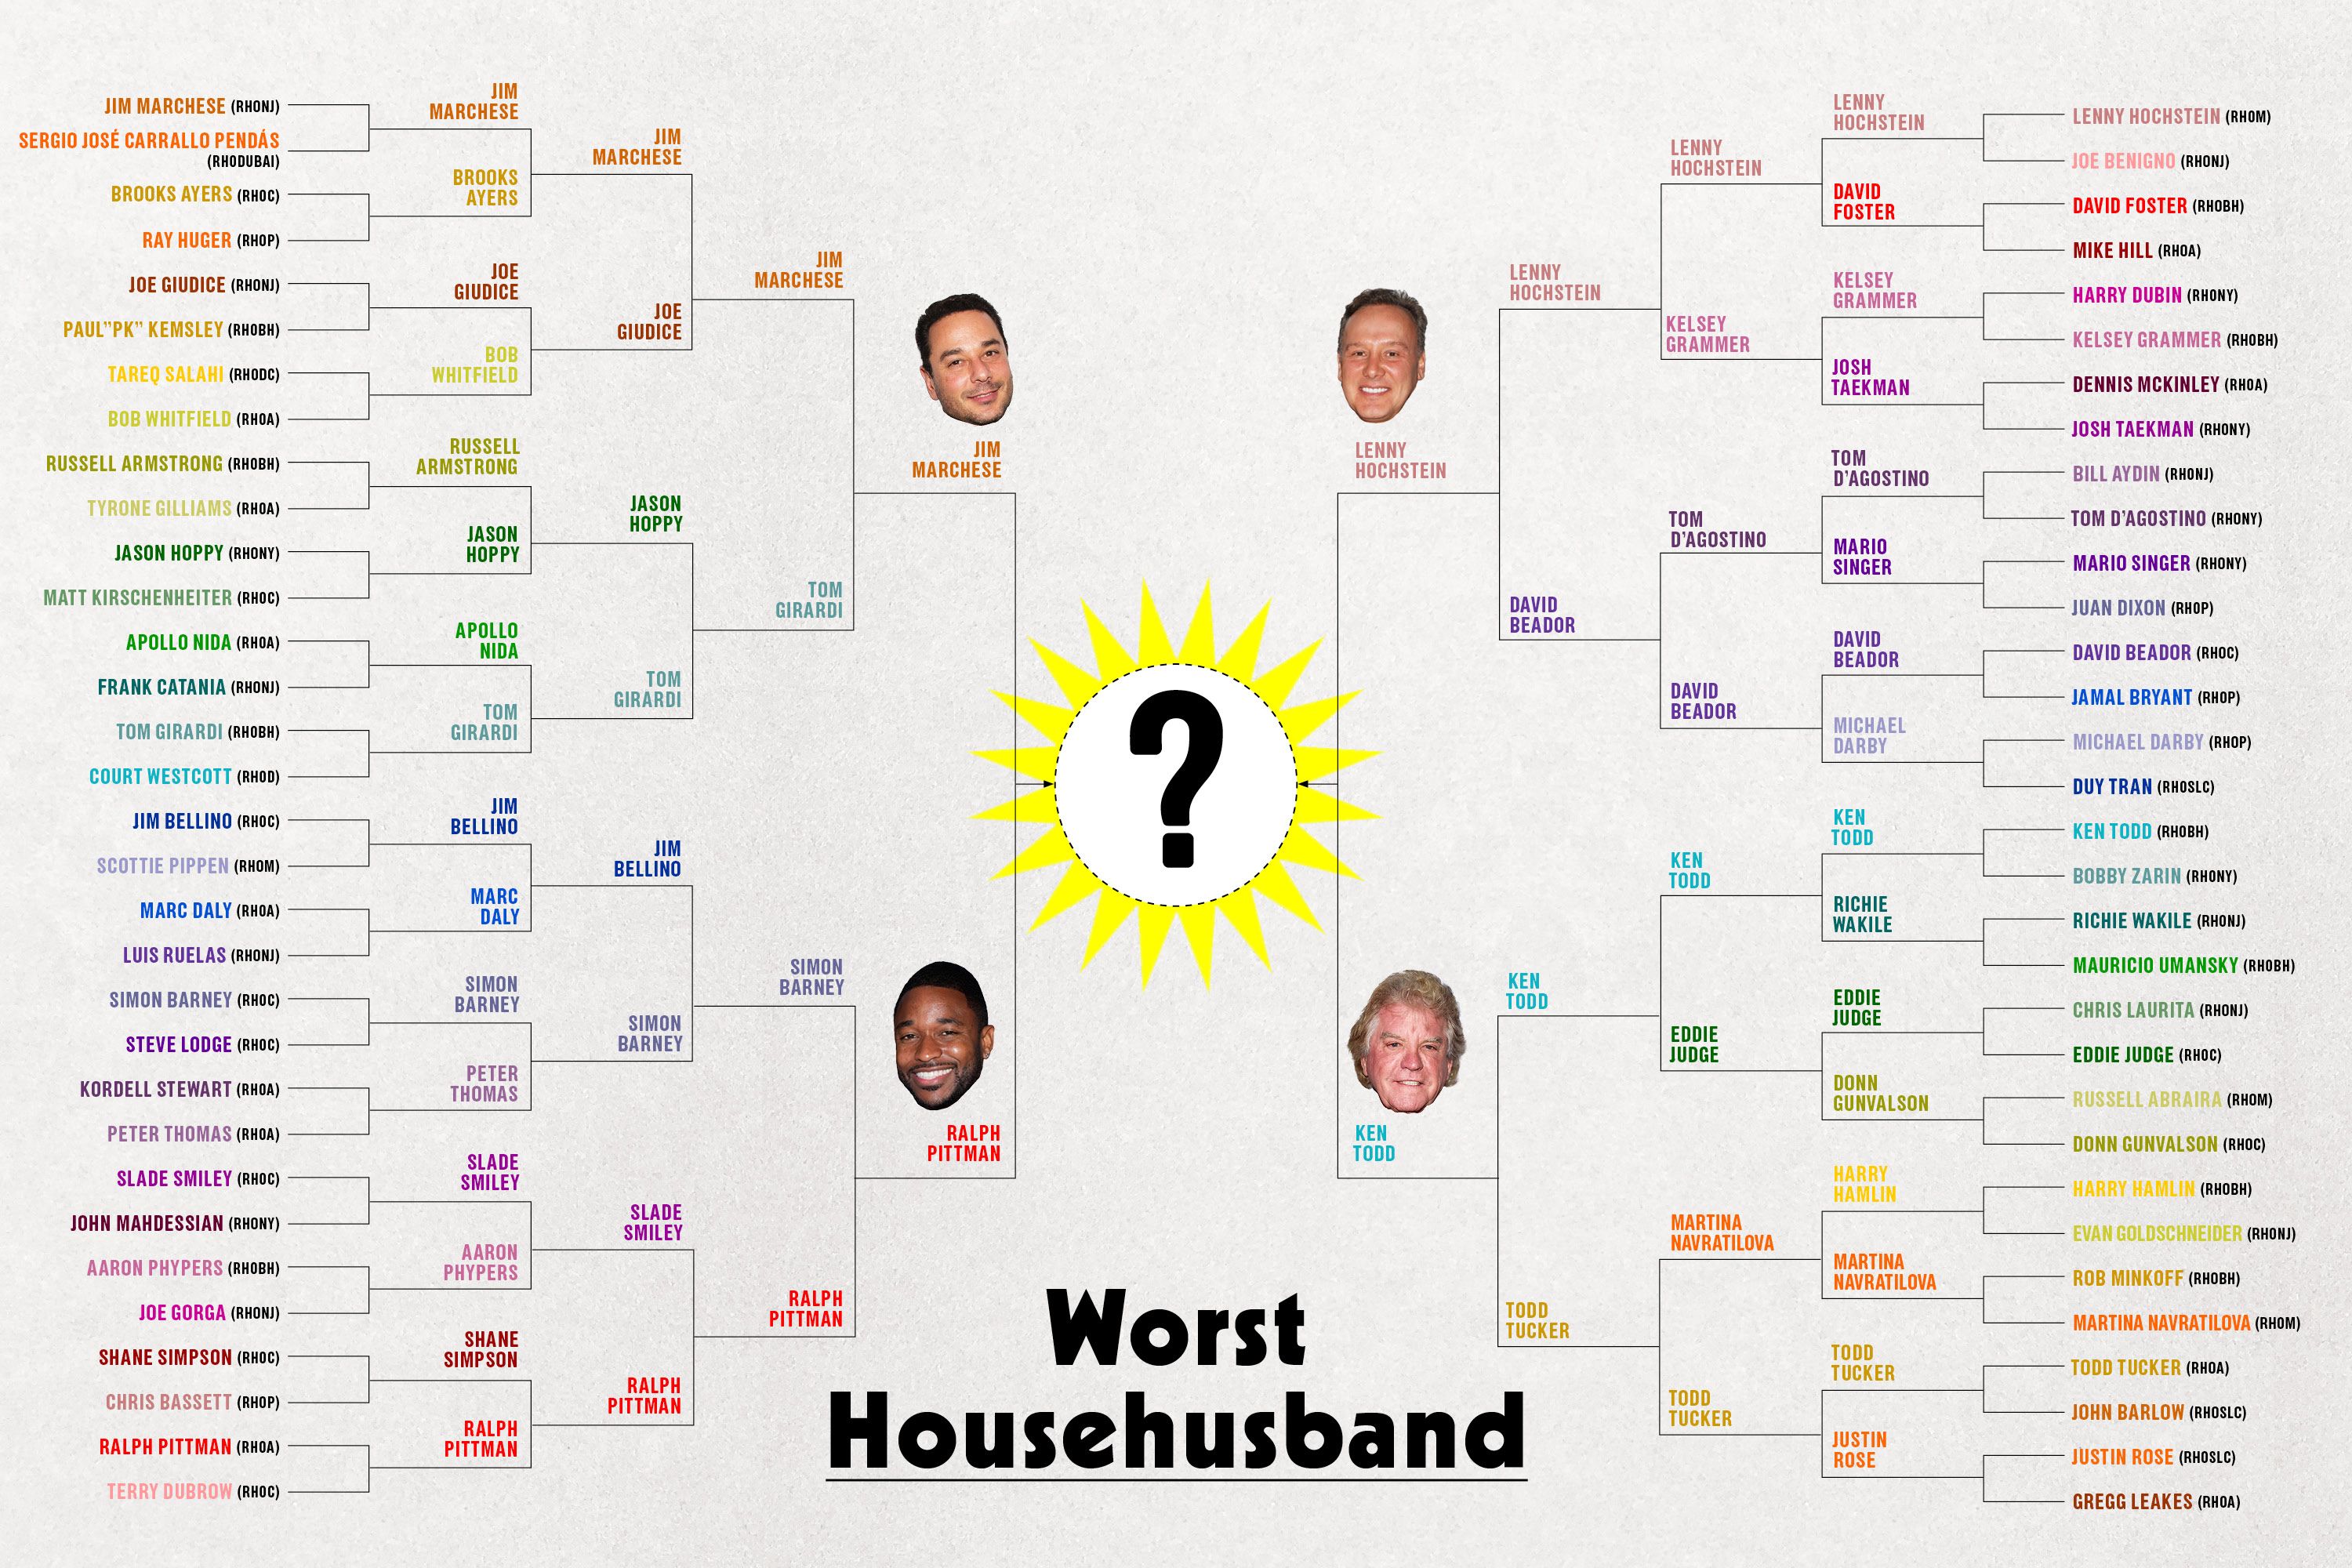 Housewives Institute Bulletin The Worst Househusband Ever